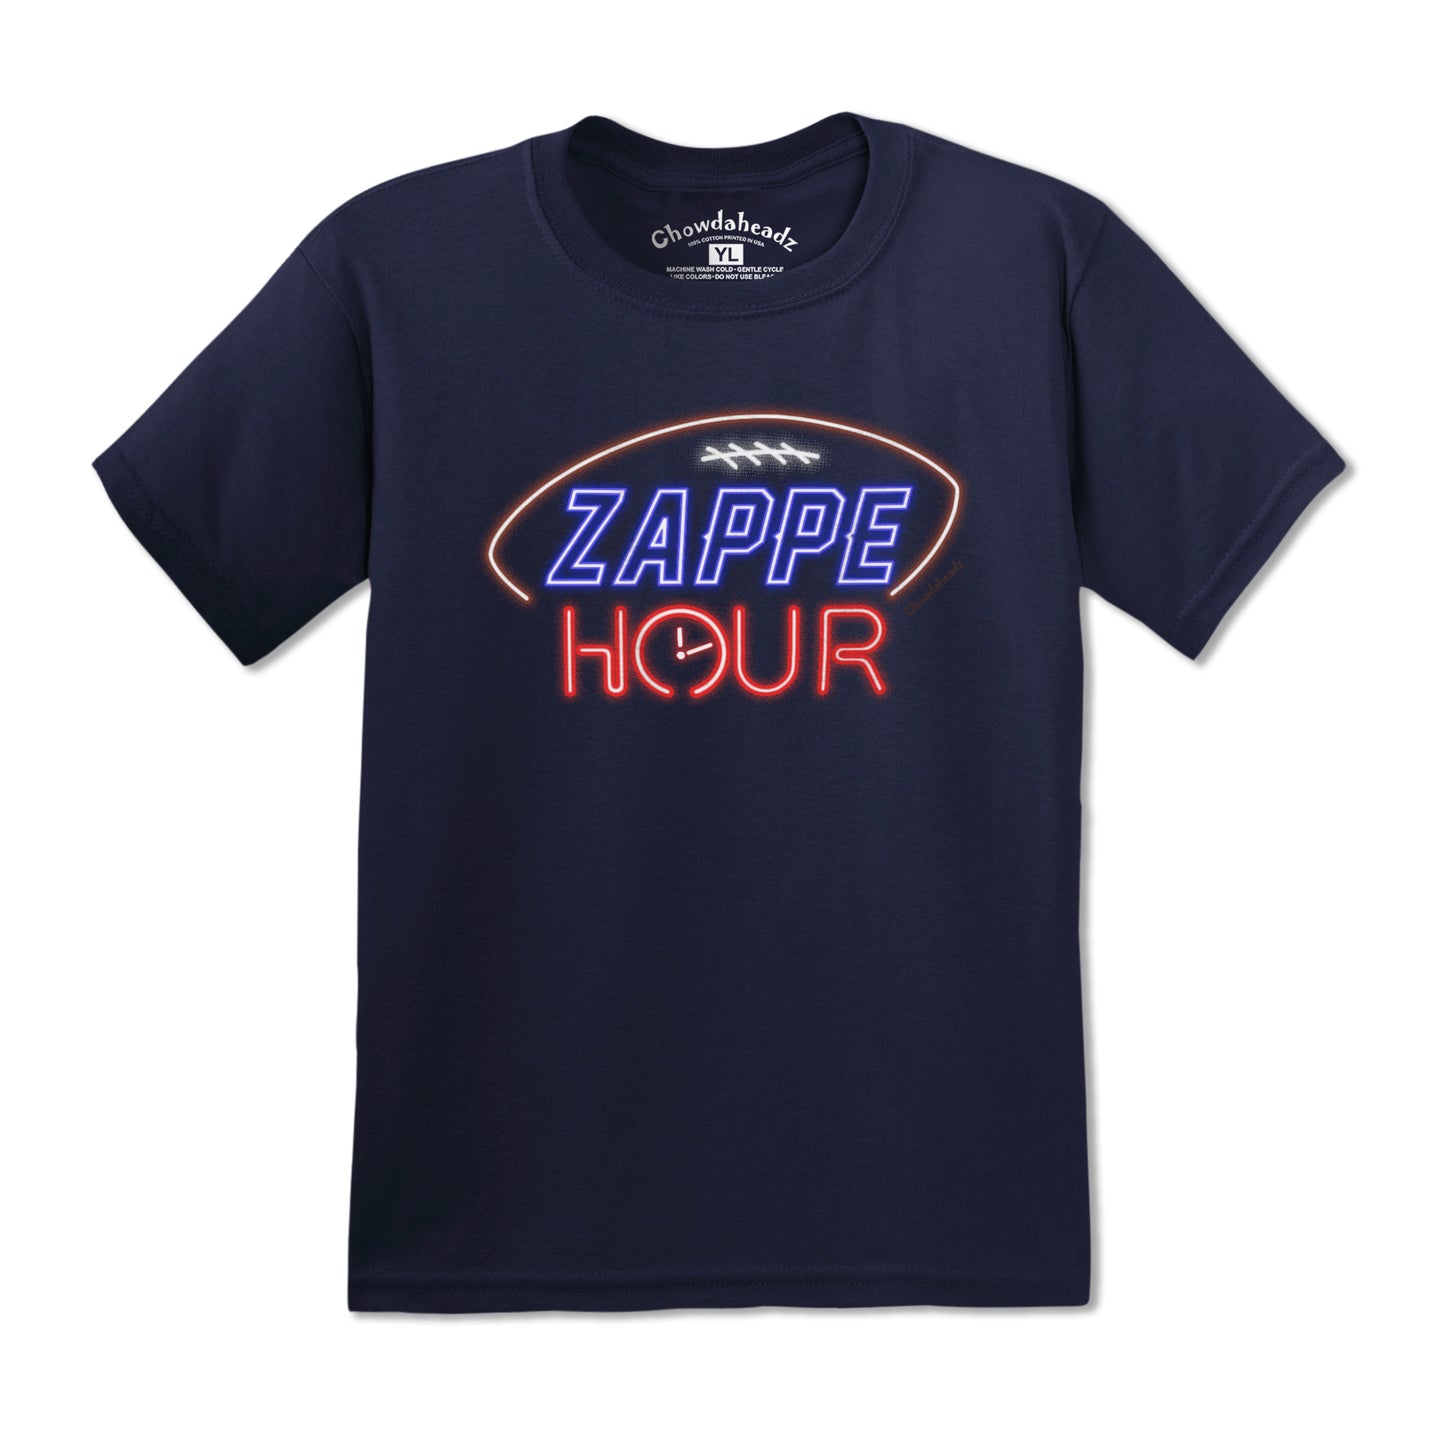 Zappe Hour Neon Sign Youth T-Shirt - Chowdaheadz